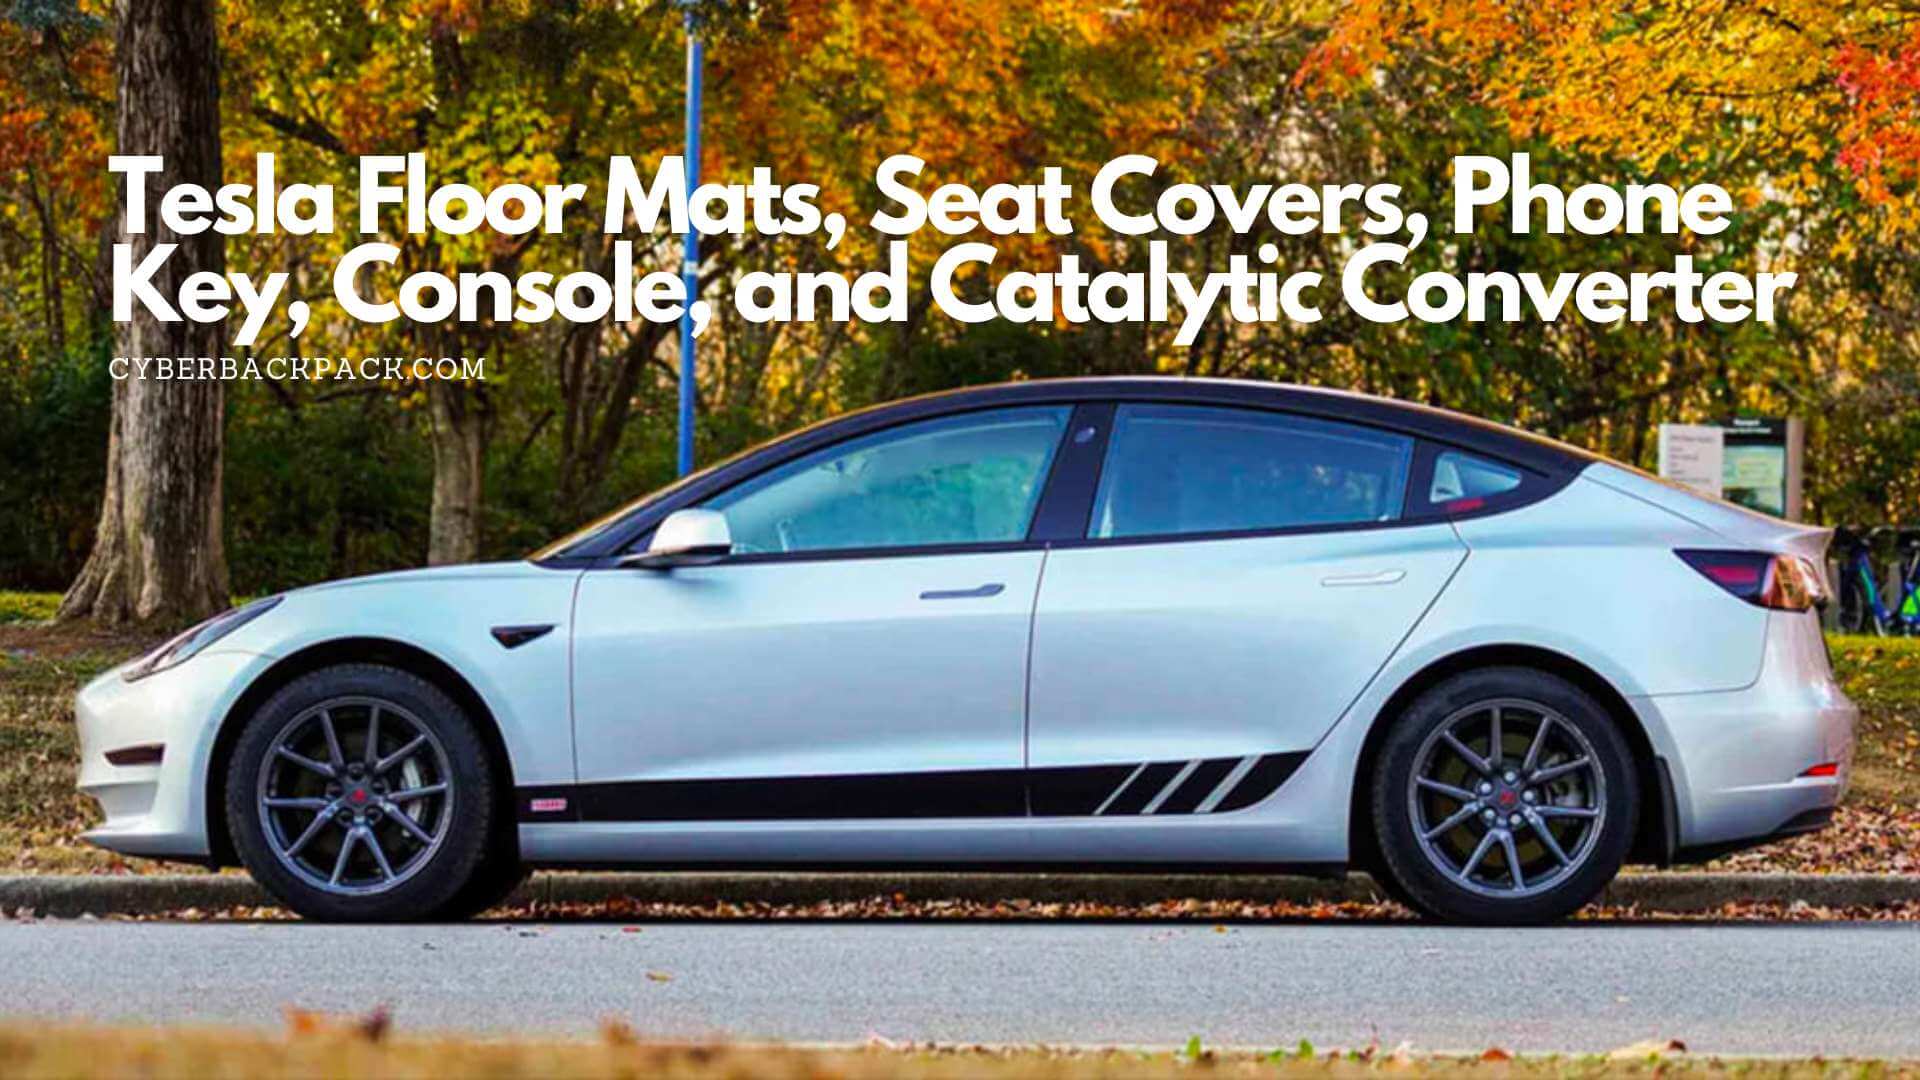 Tesla Floor Mats, Seat Covers, Phone Key, Console, and Catalytic Converter